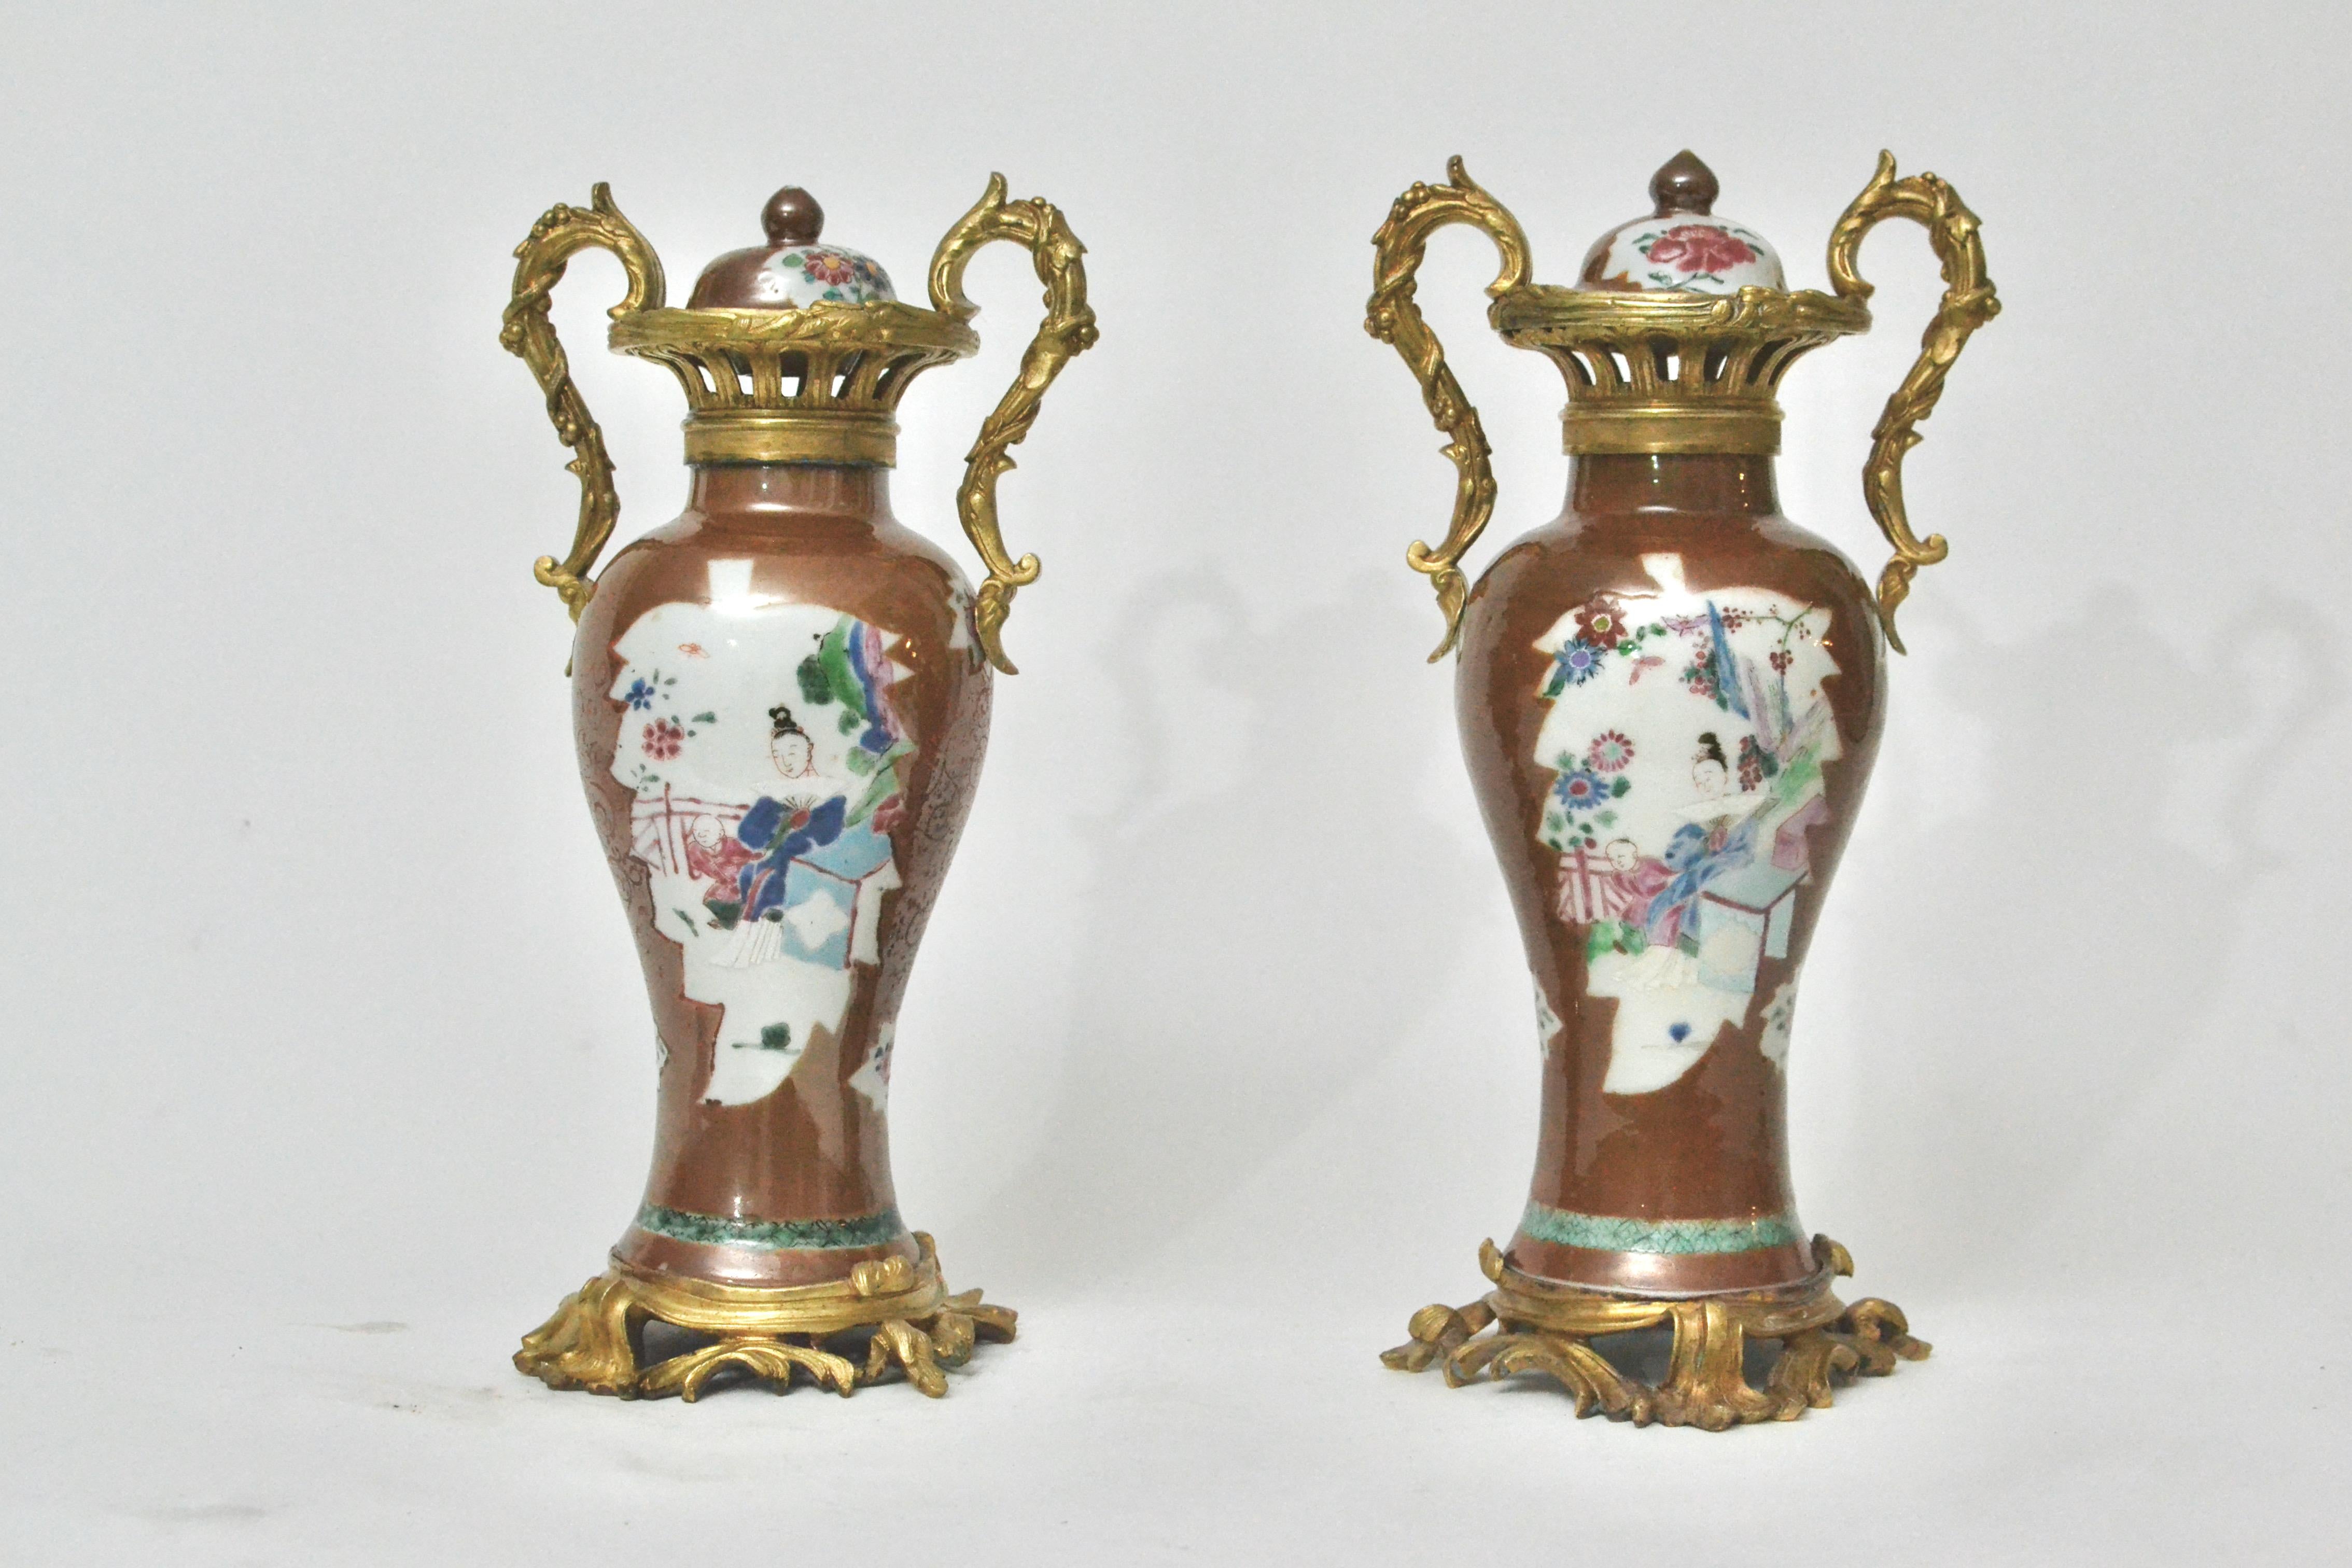 Gilt Pair of Chinese Ormolu Mounted Porcelain Vases, 18th Century